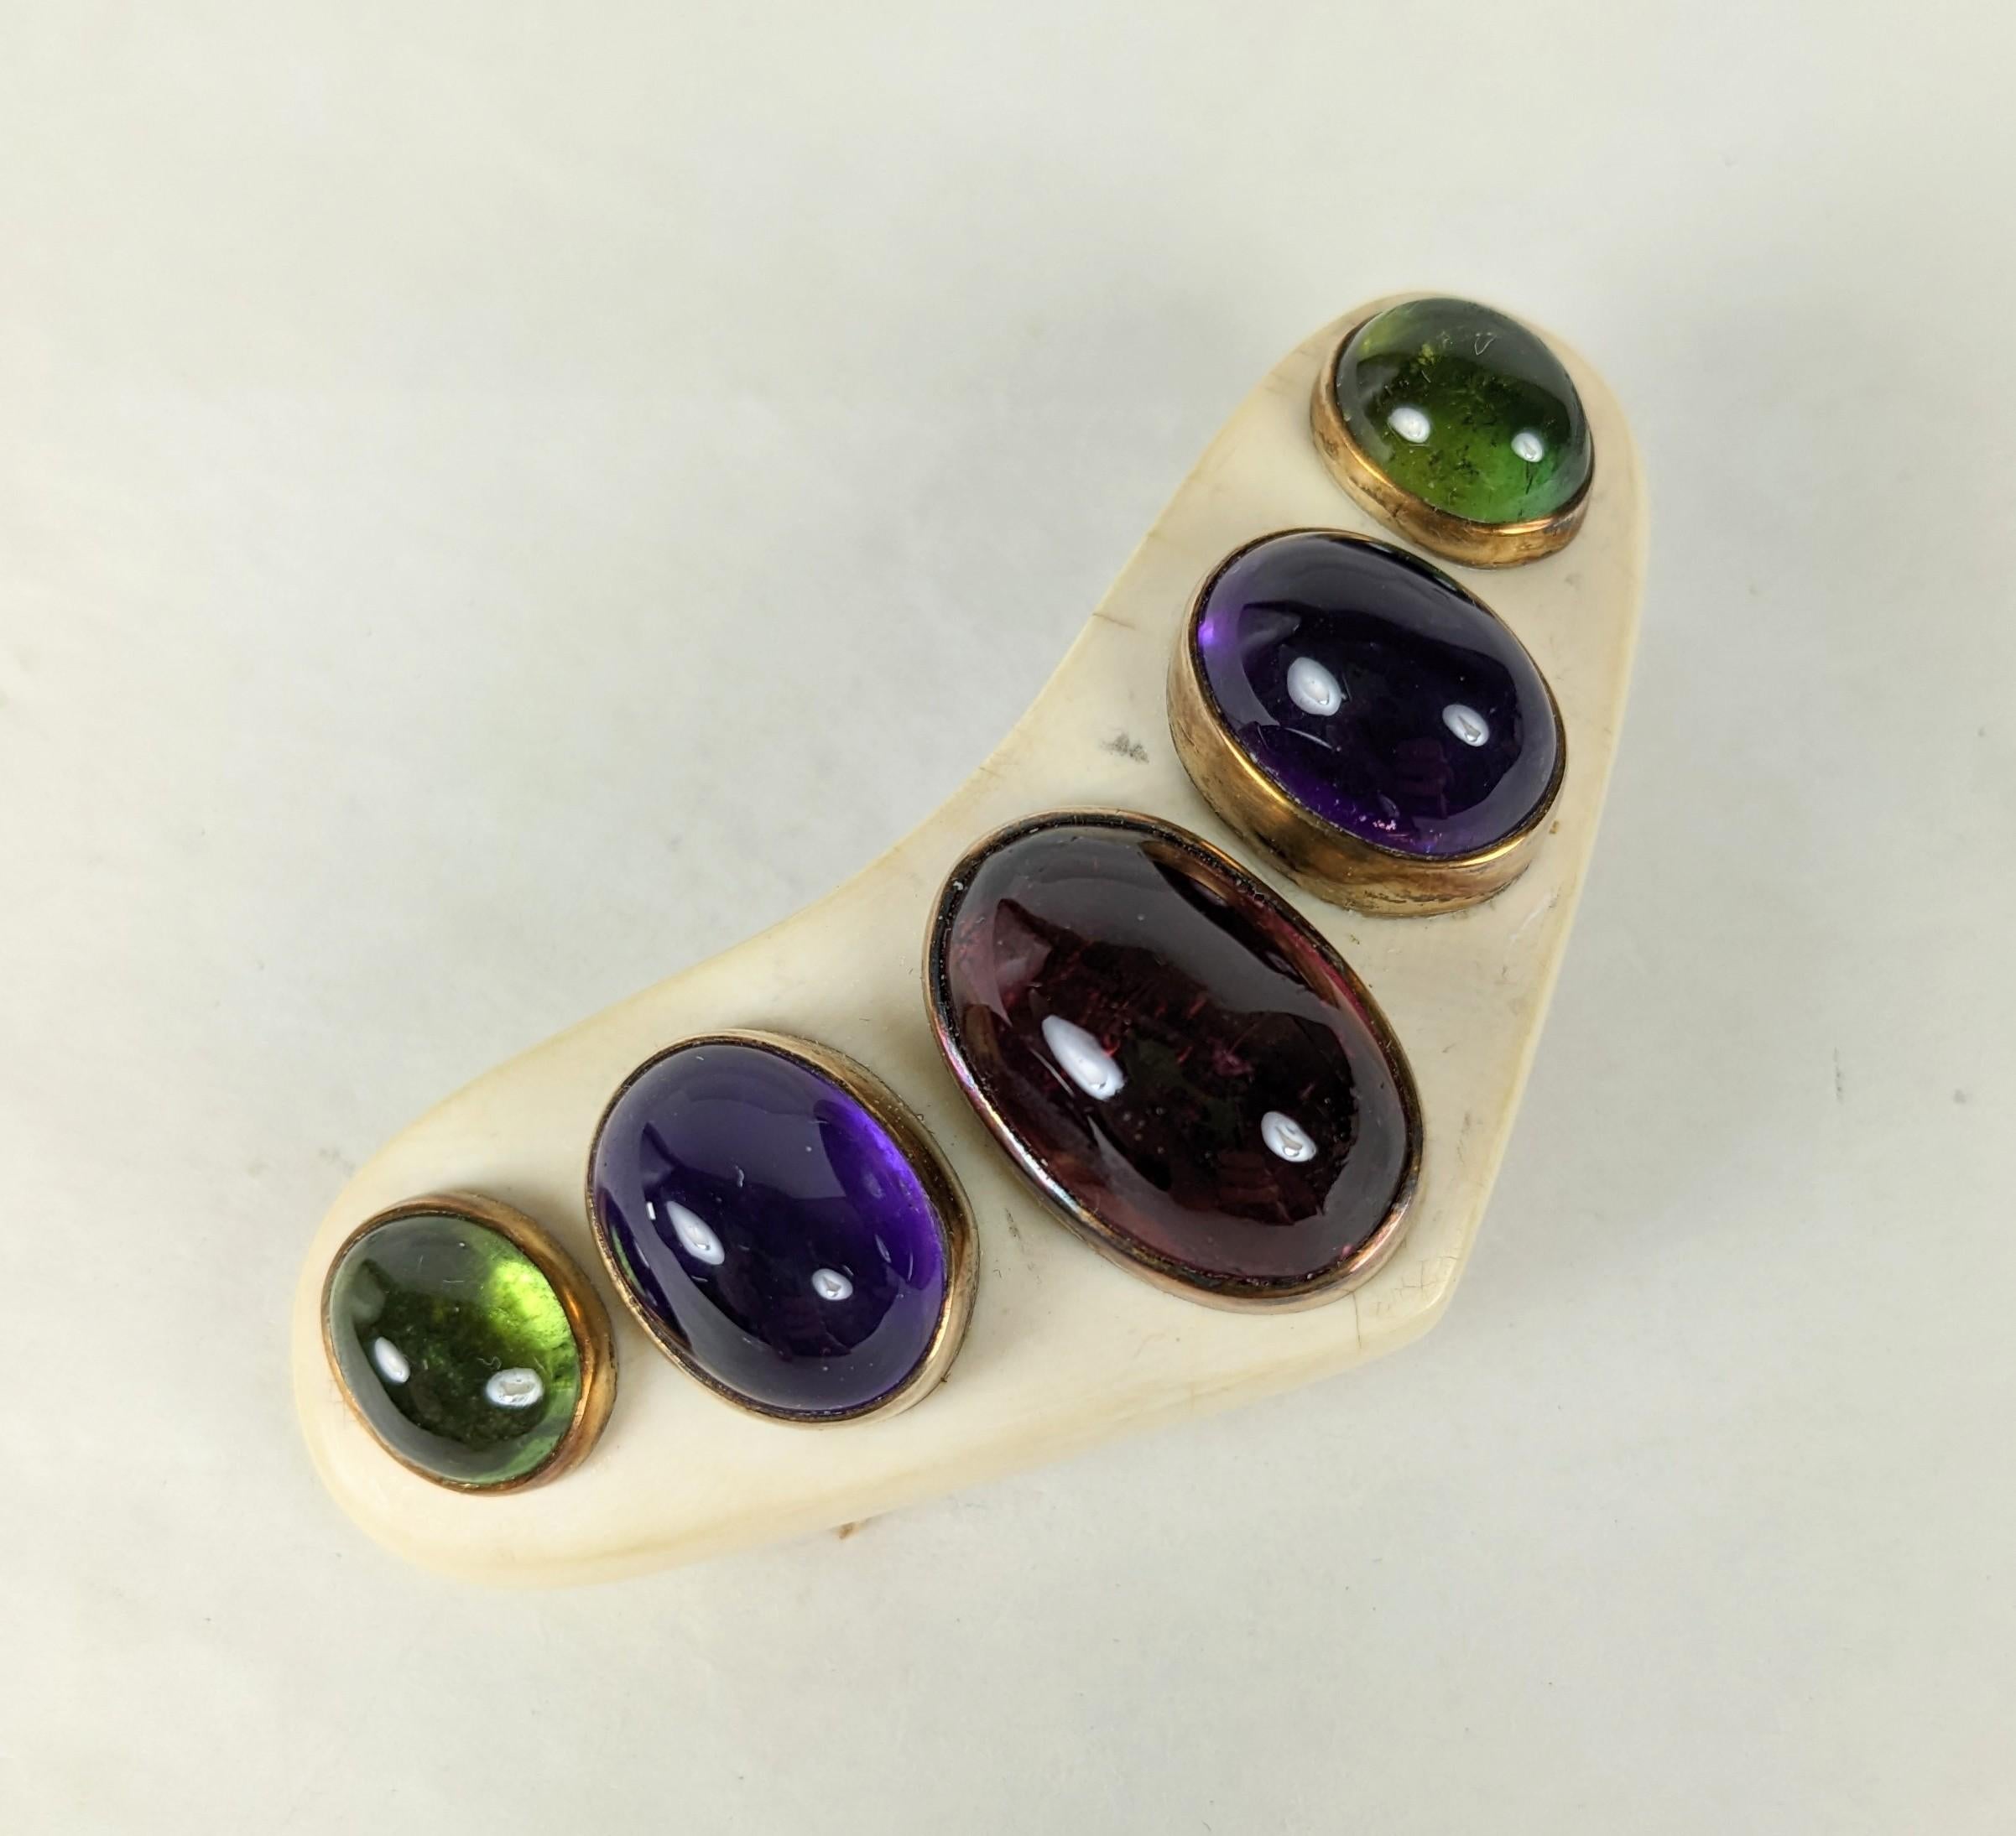 Gemstone Cabochon Boomerang Clip with a series of graduated oval cabochons set in 18k gold on a carved bone boomerang shaped clip brooch. Green and pink tourmalines are sued along with amythests. Maker: 18K with 